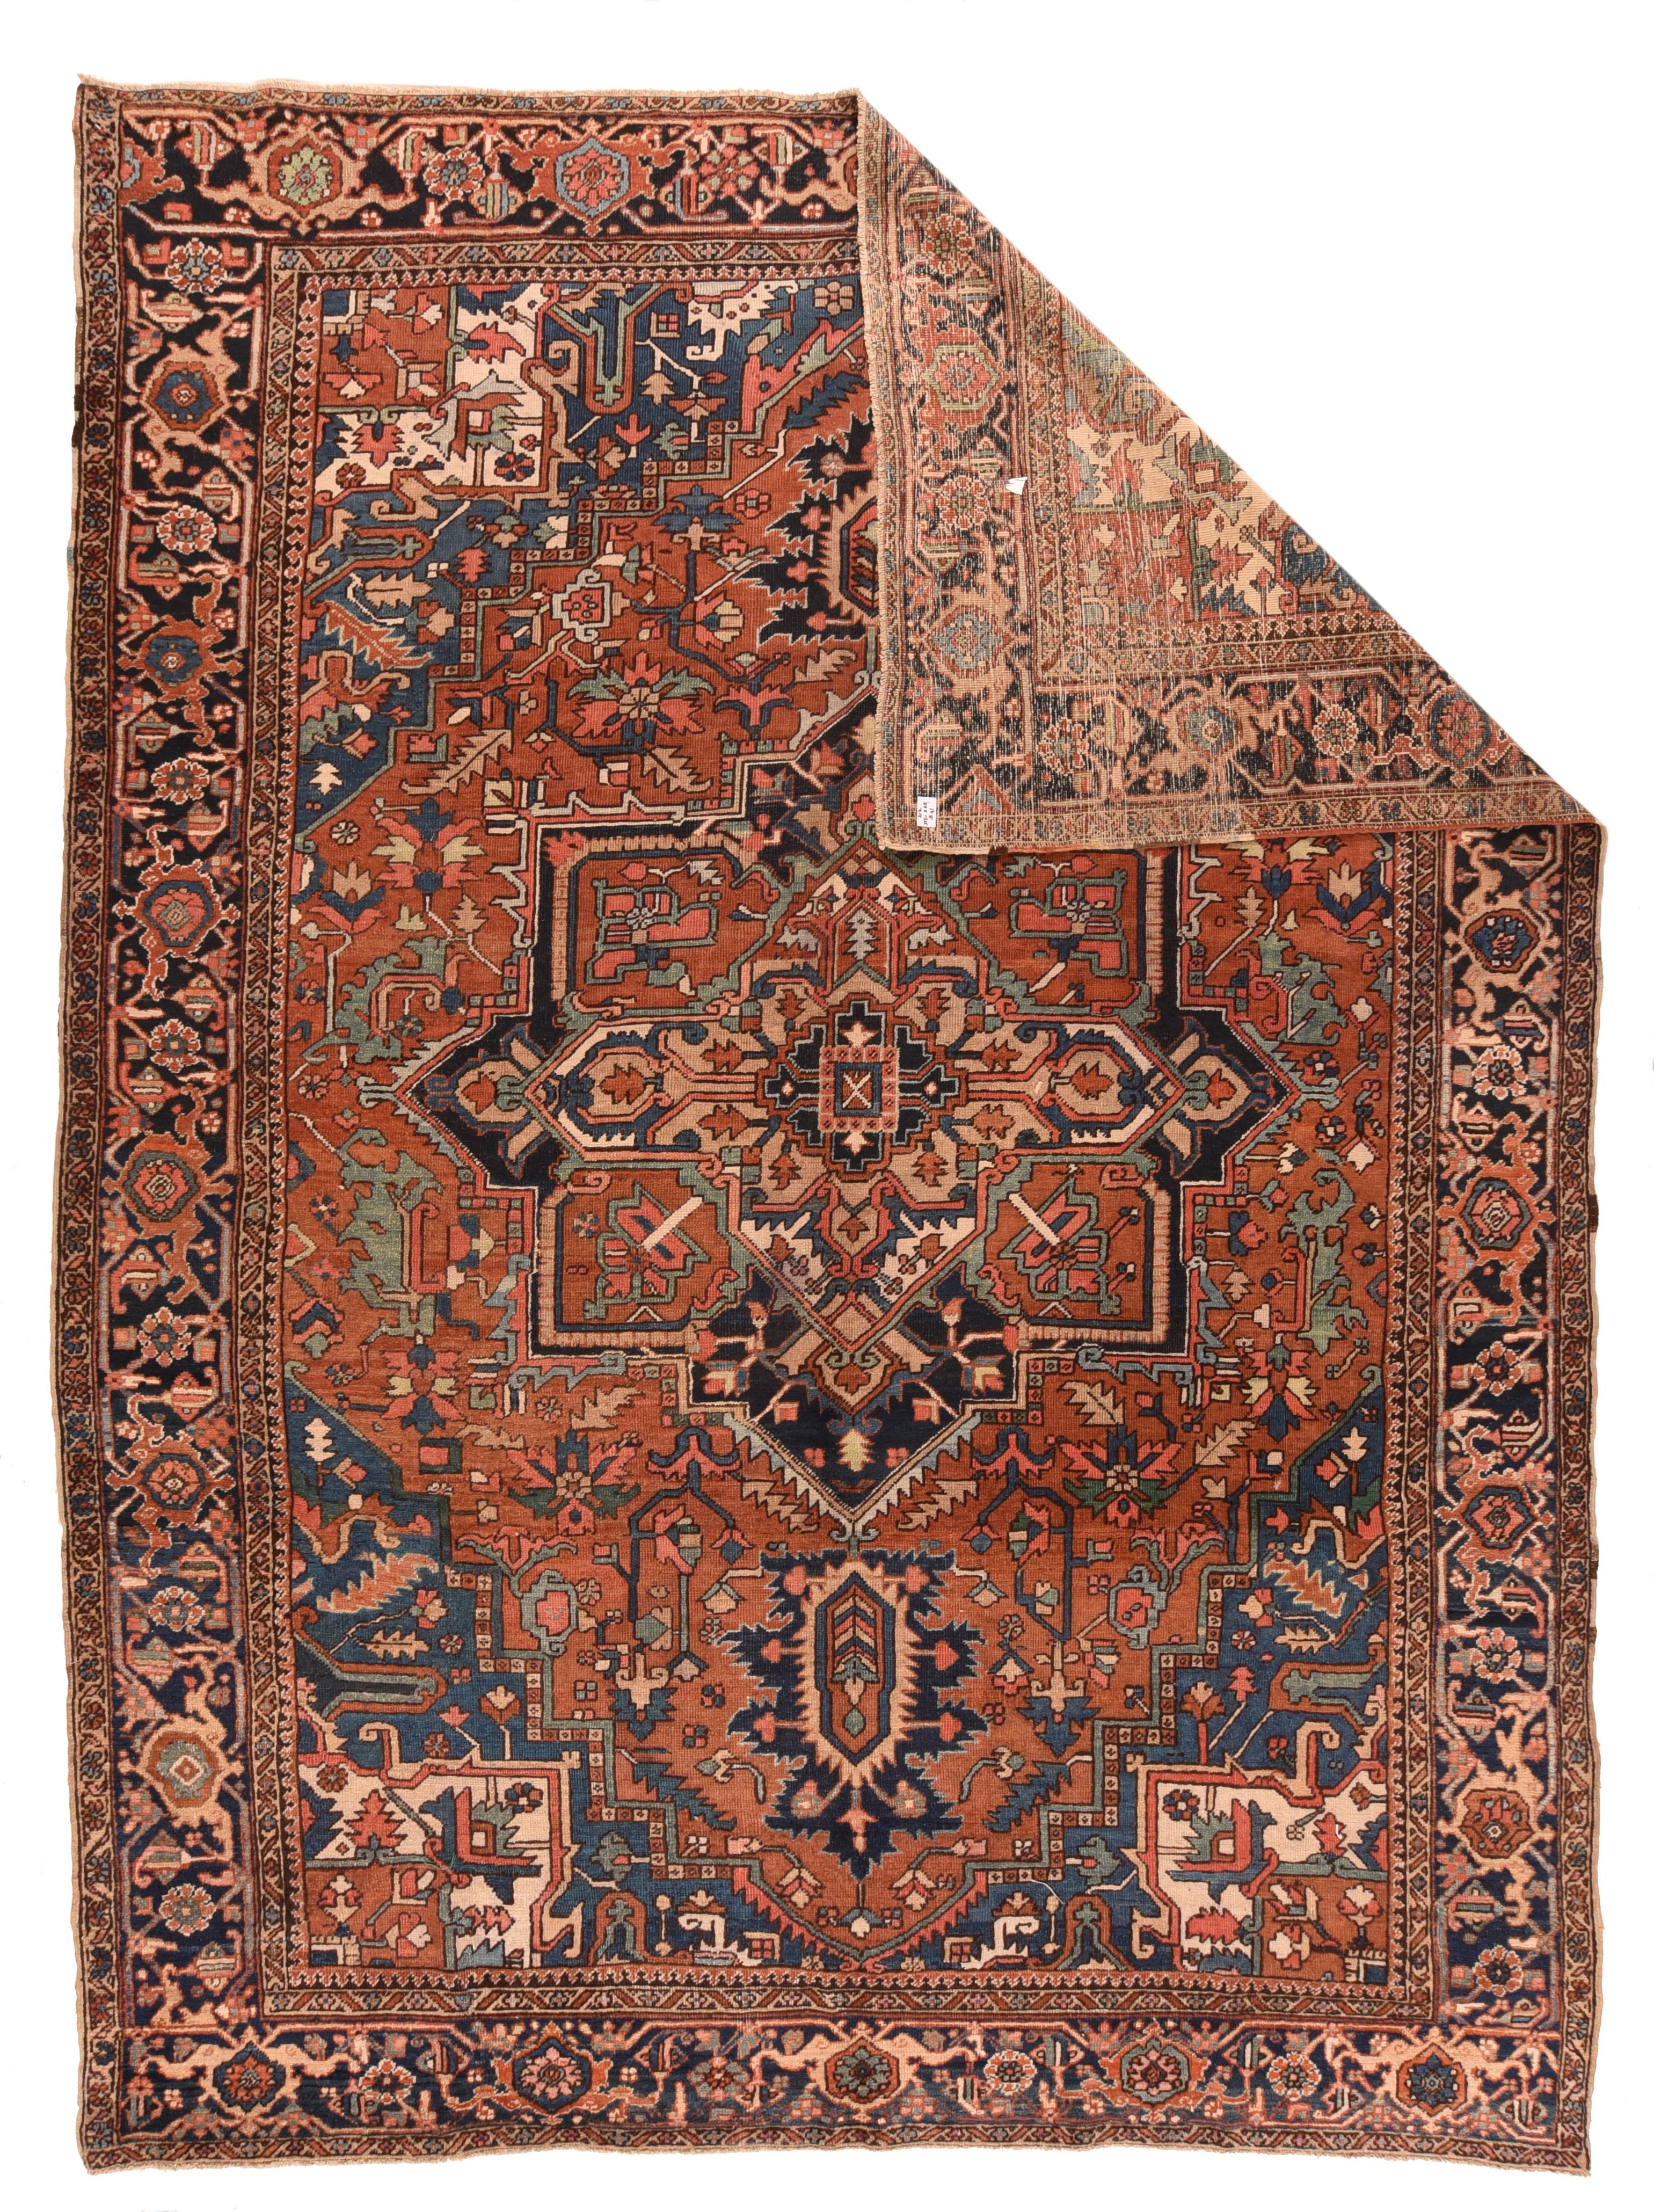 Moderately coarse, this broadly drawn NW Persian rural piece shows a navy and red octogramme medallion with bold navy ragged petal palmette pendants, on the slightly soft tomato red field displaying green leaves. The corners show ecru pointed